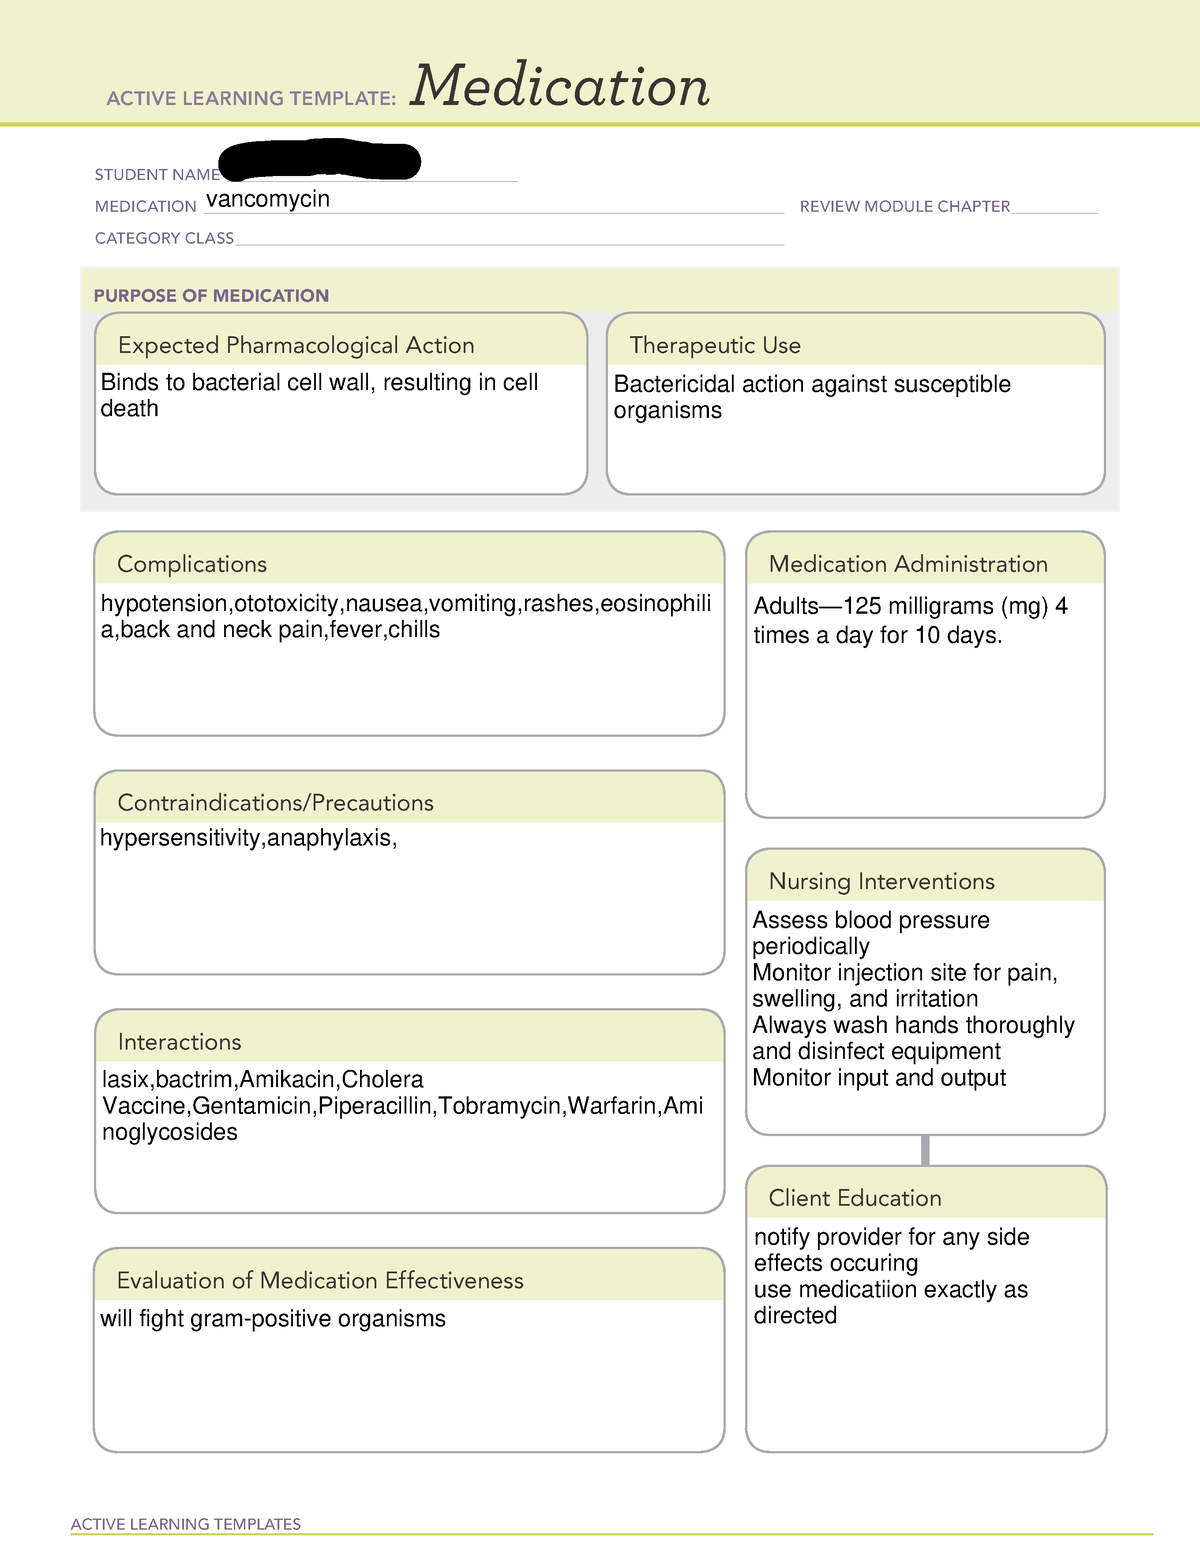 Med card vanco ACTIVE LEARNING TEMPLATES Medication